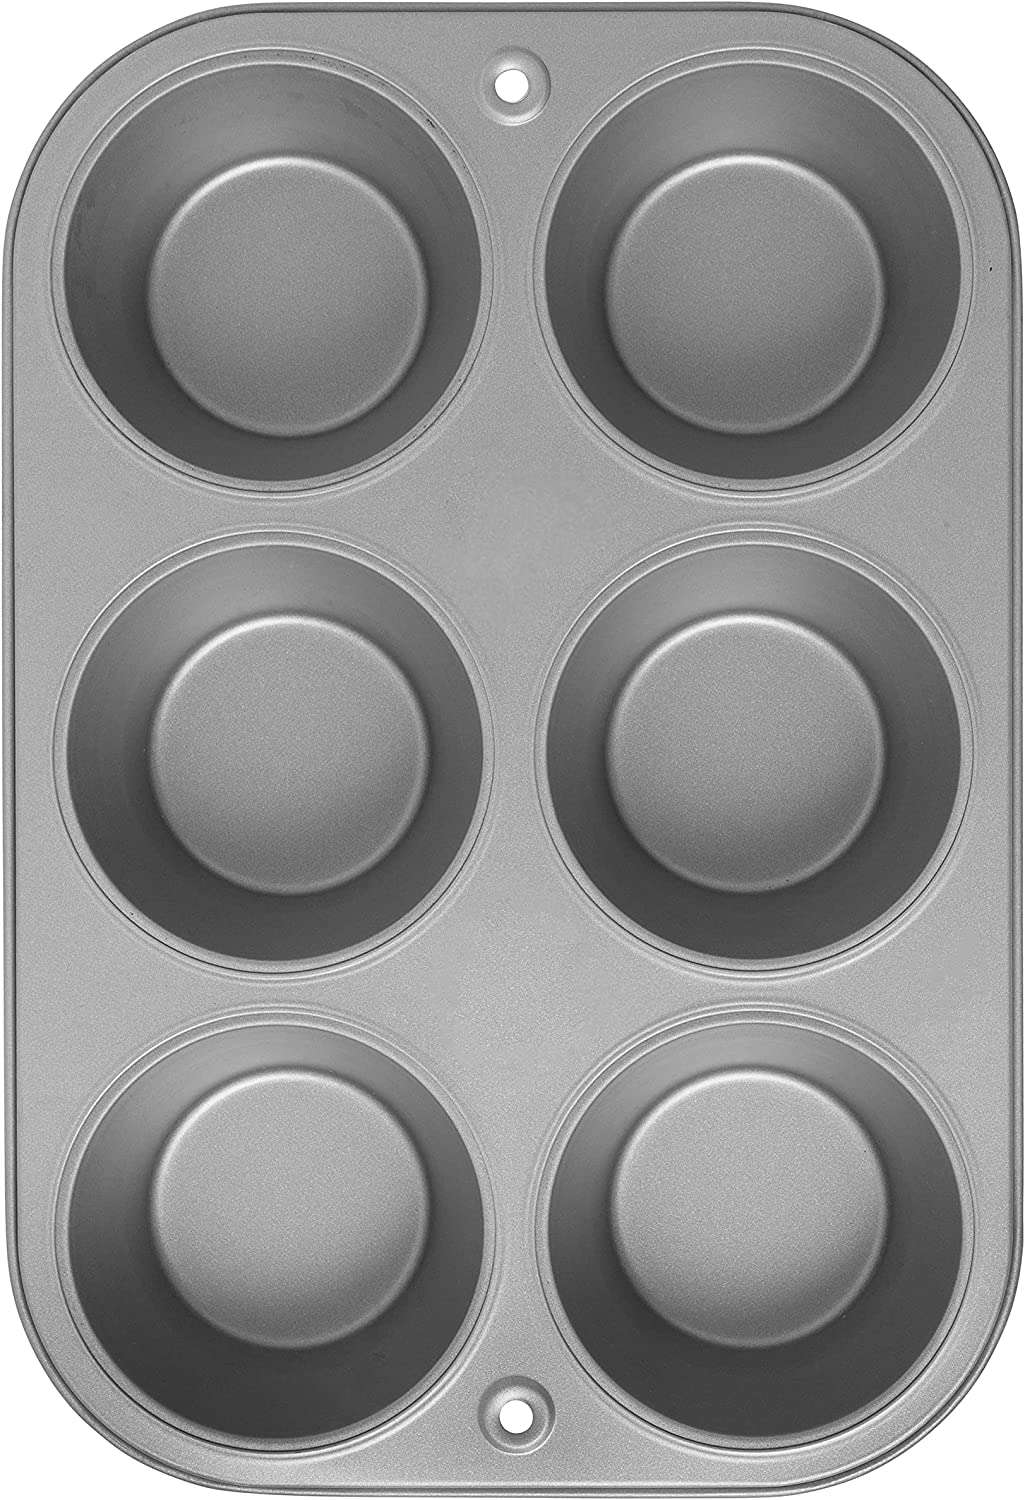 5. G & S Metal Products Company Muffin Pan